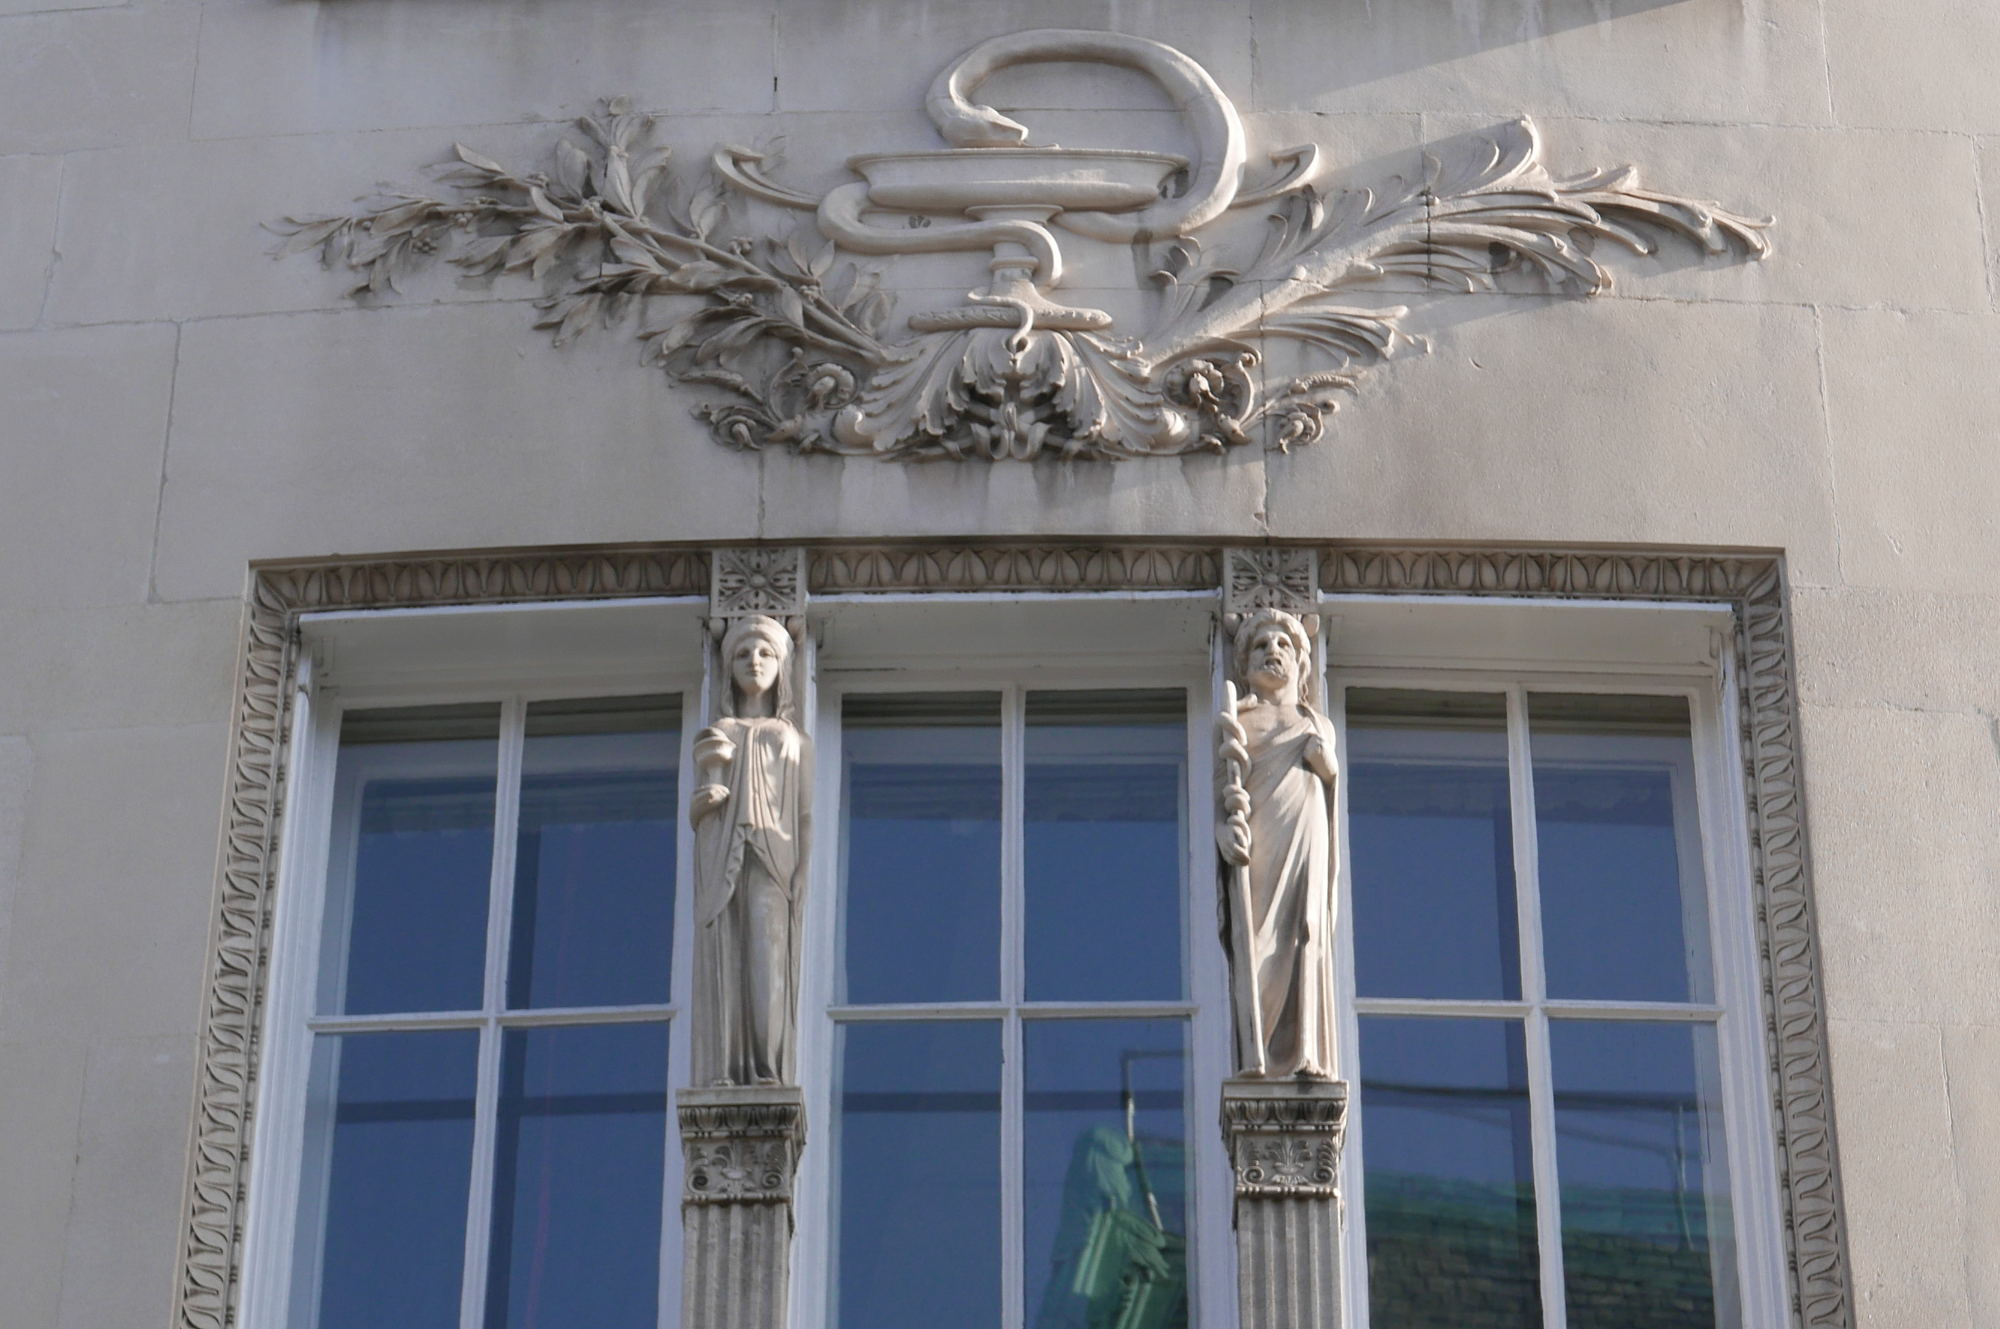 Statues and carving on front of building.